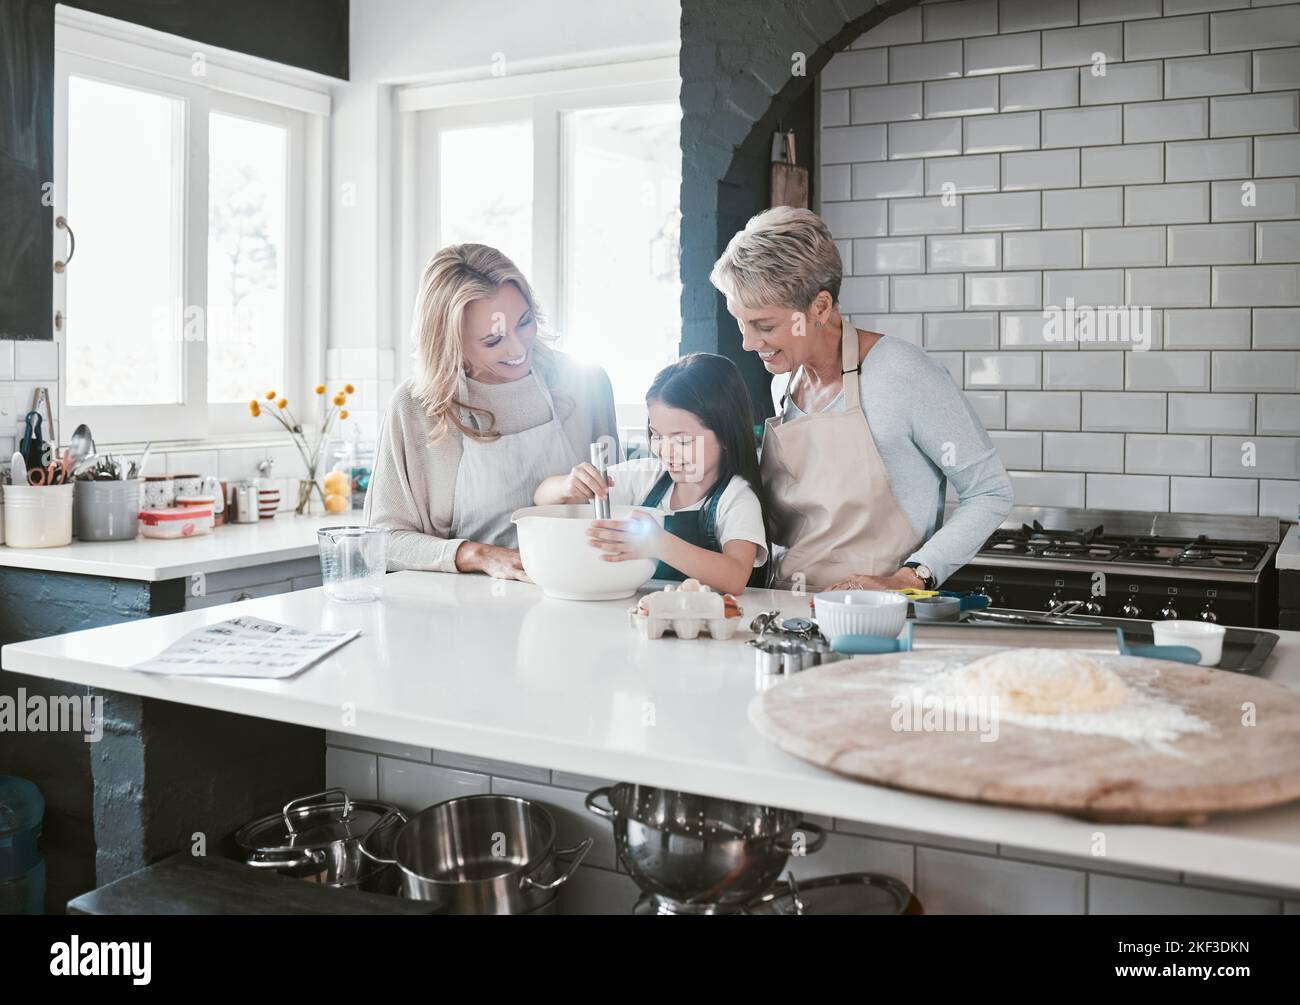 .Happy, joyful and loving mother and grandmother cooking, baking and preparing food with their daughter and grandchild. Happy, cheerful and carefree Stock Photo